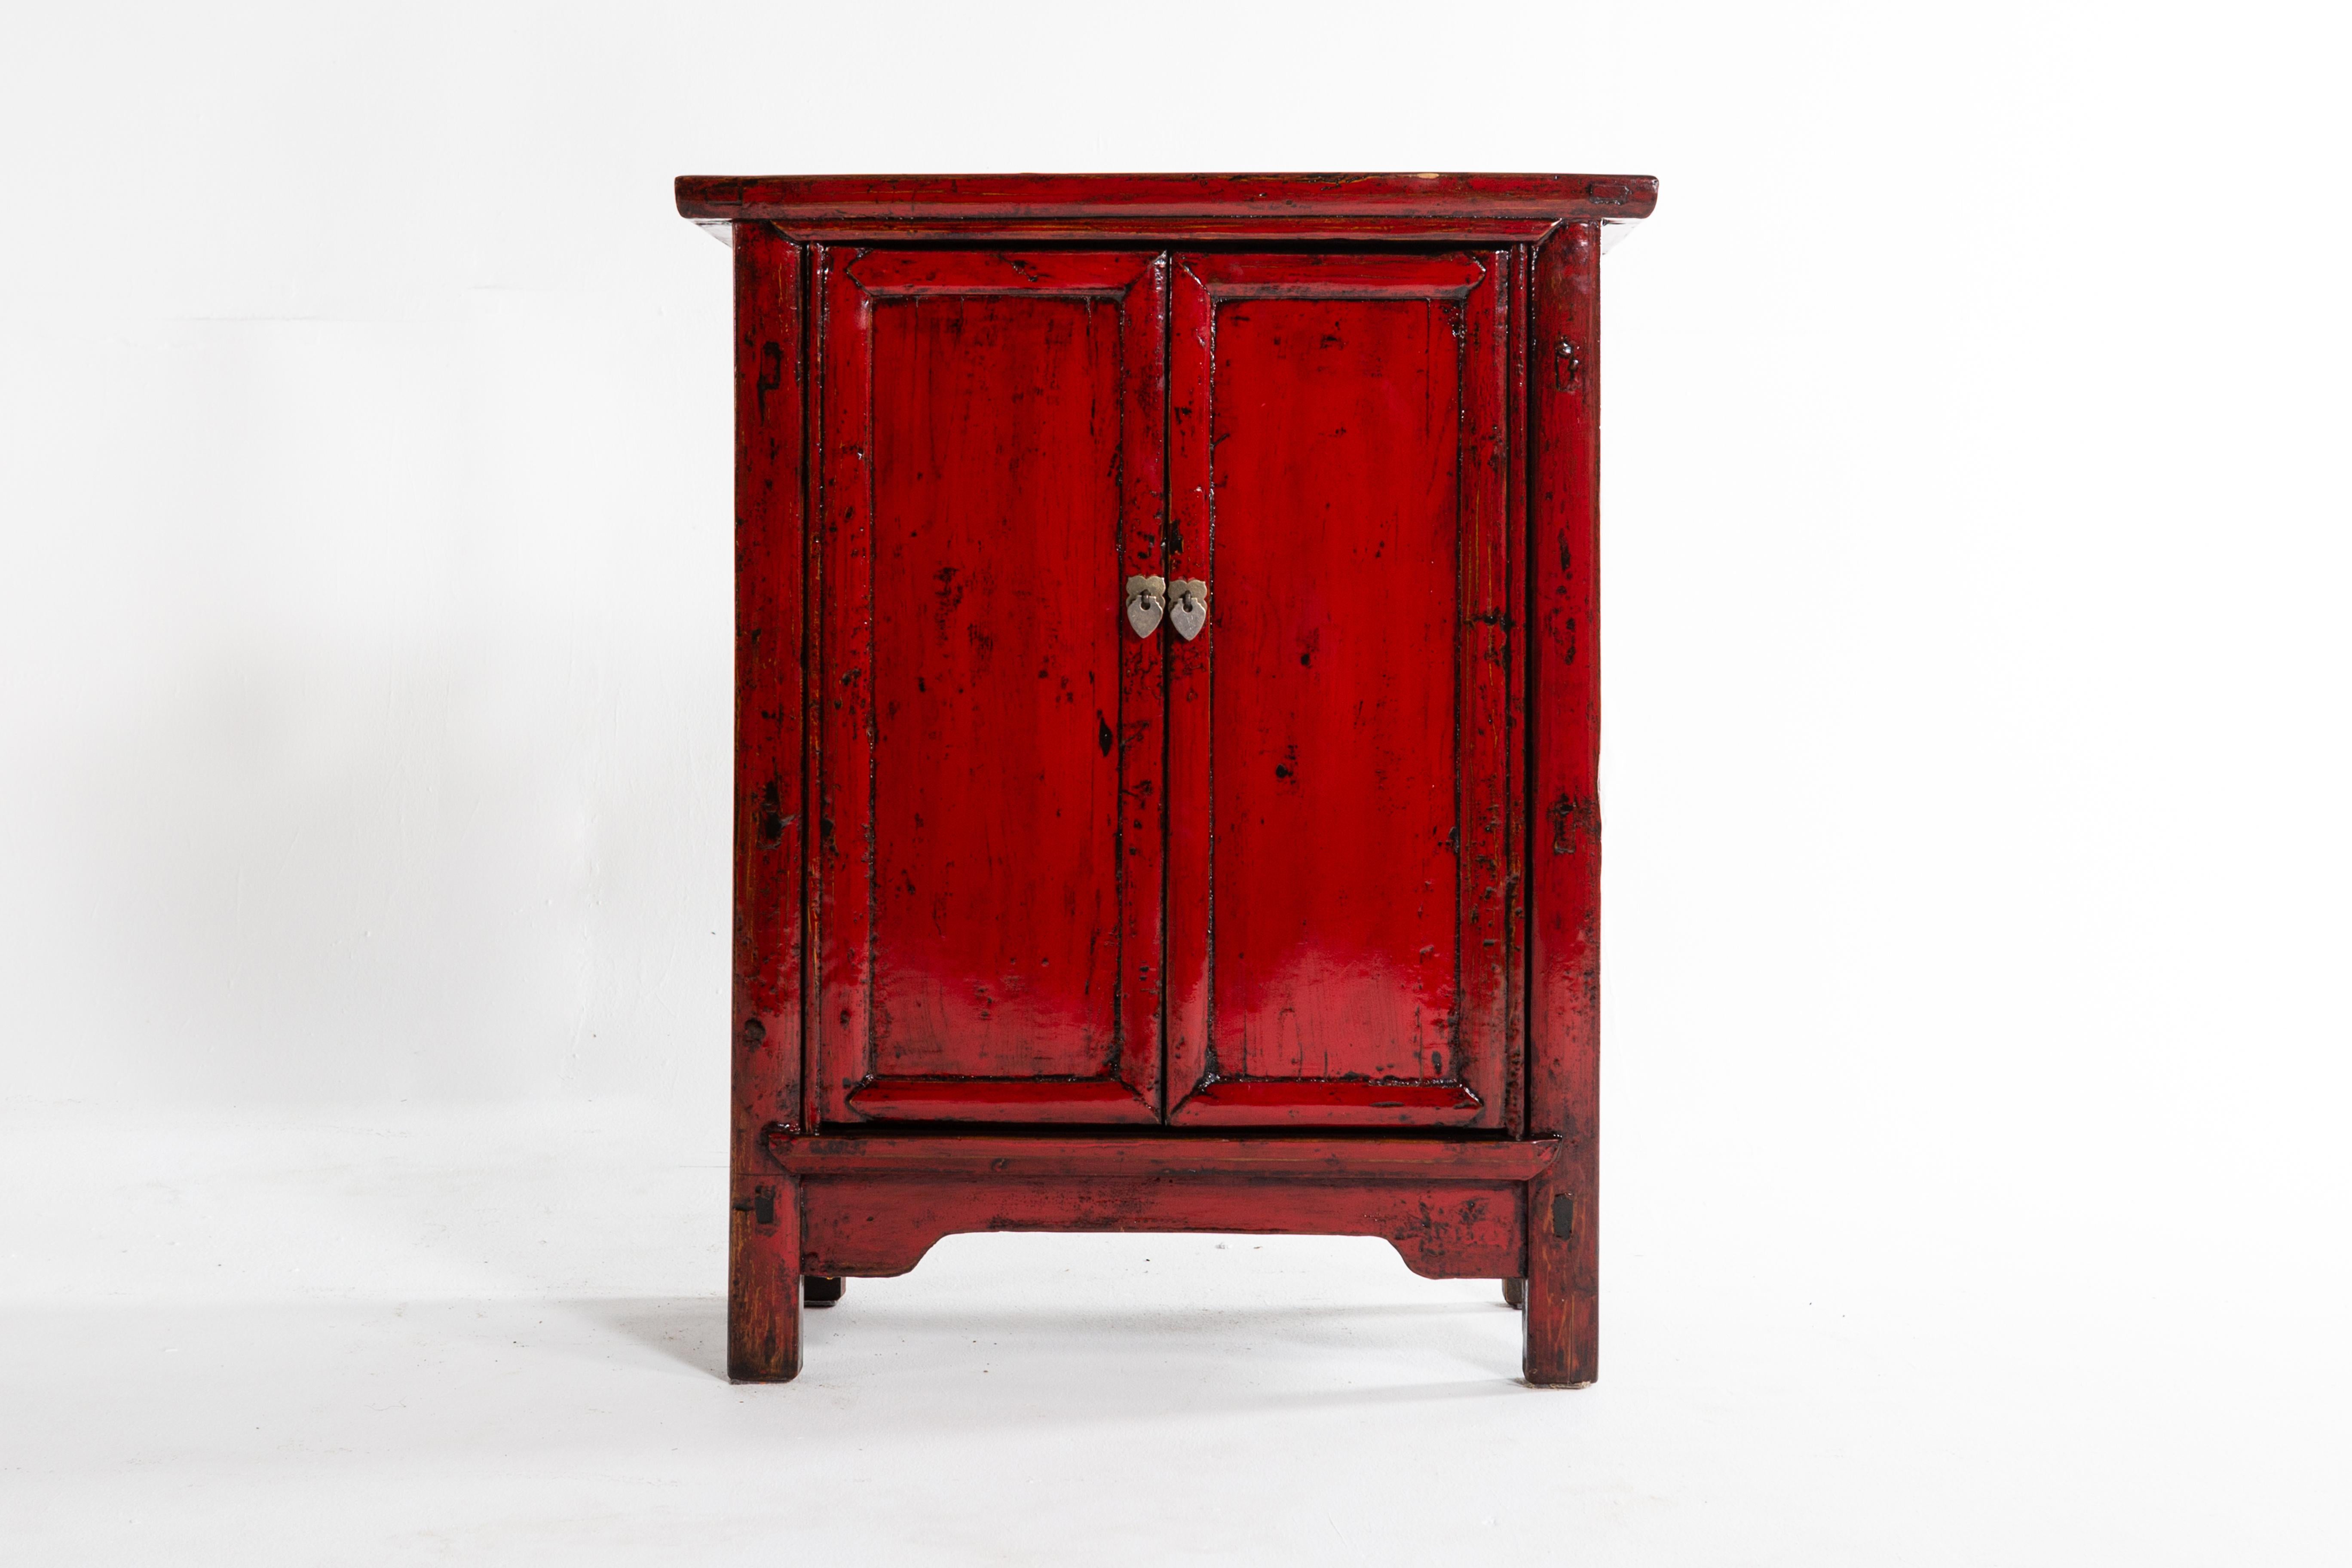 20th Century Red Lacquer Chinese Cabinet with a Pair of Doors